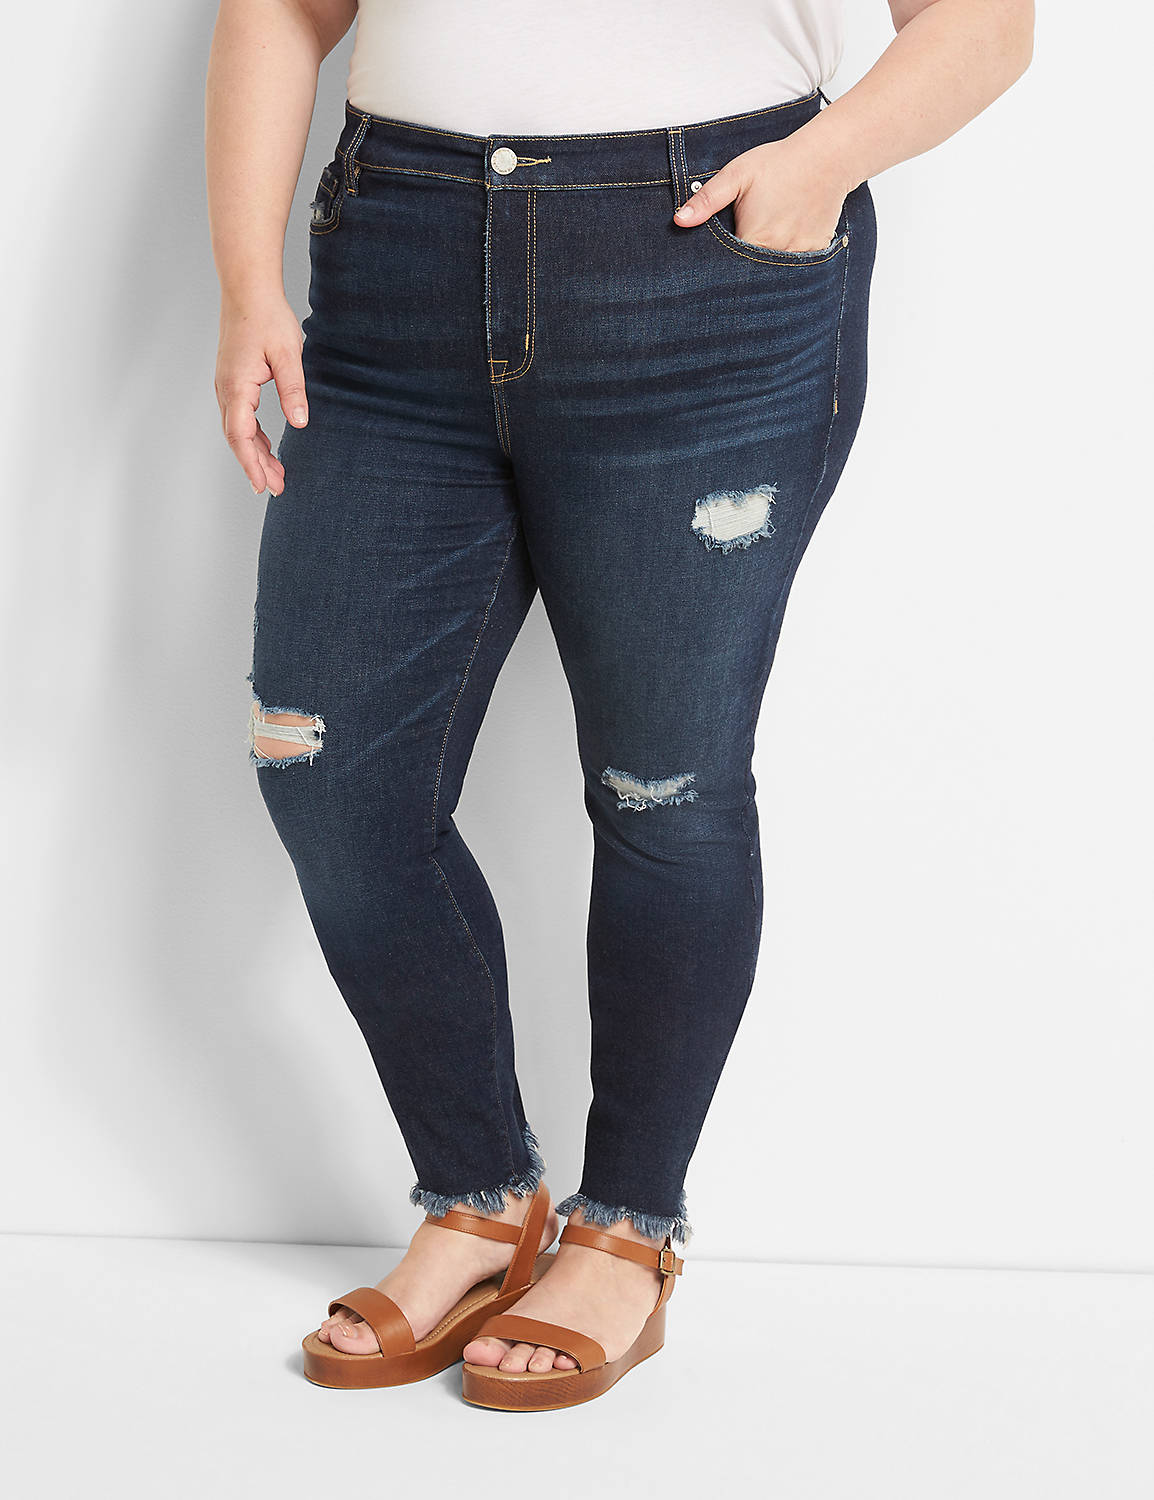 Straight Fit High-Rise Skinny Jean Product Image 1